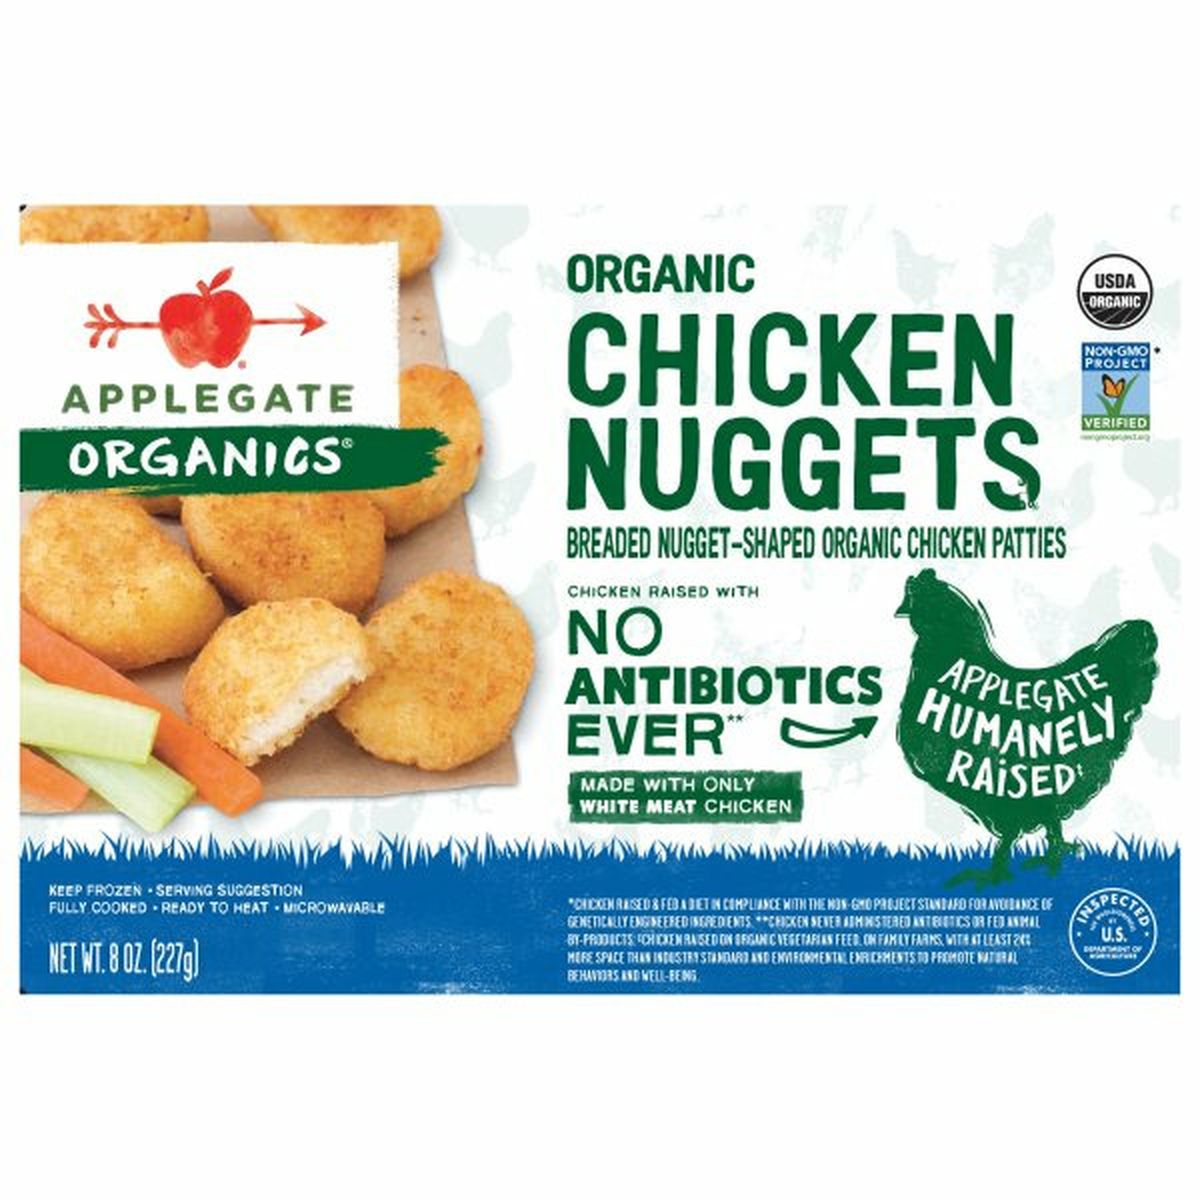 Calories in Applegate Chicken Nuggets, Organic, Breaded